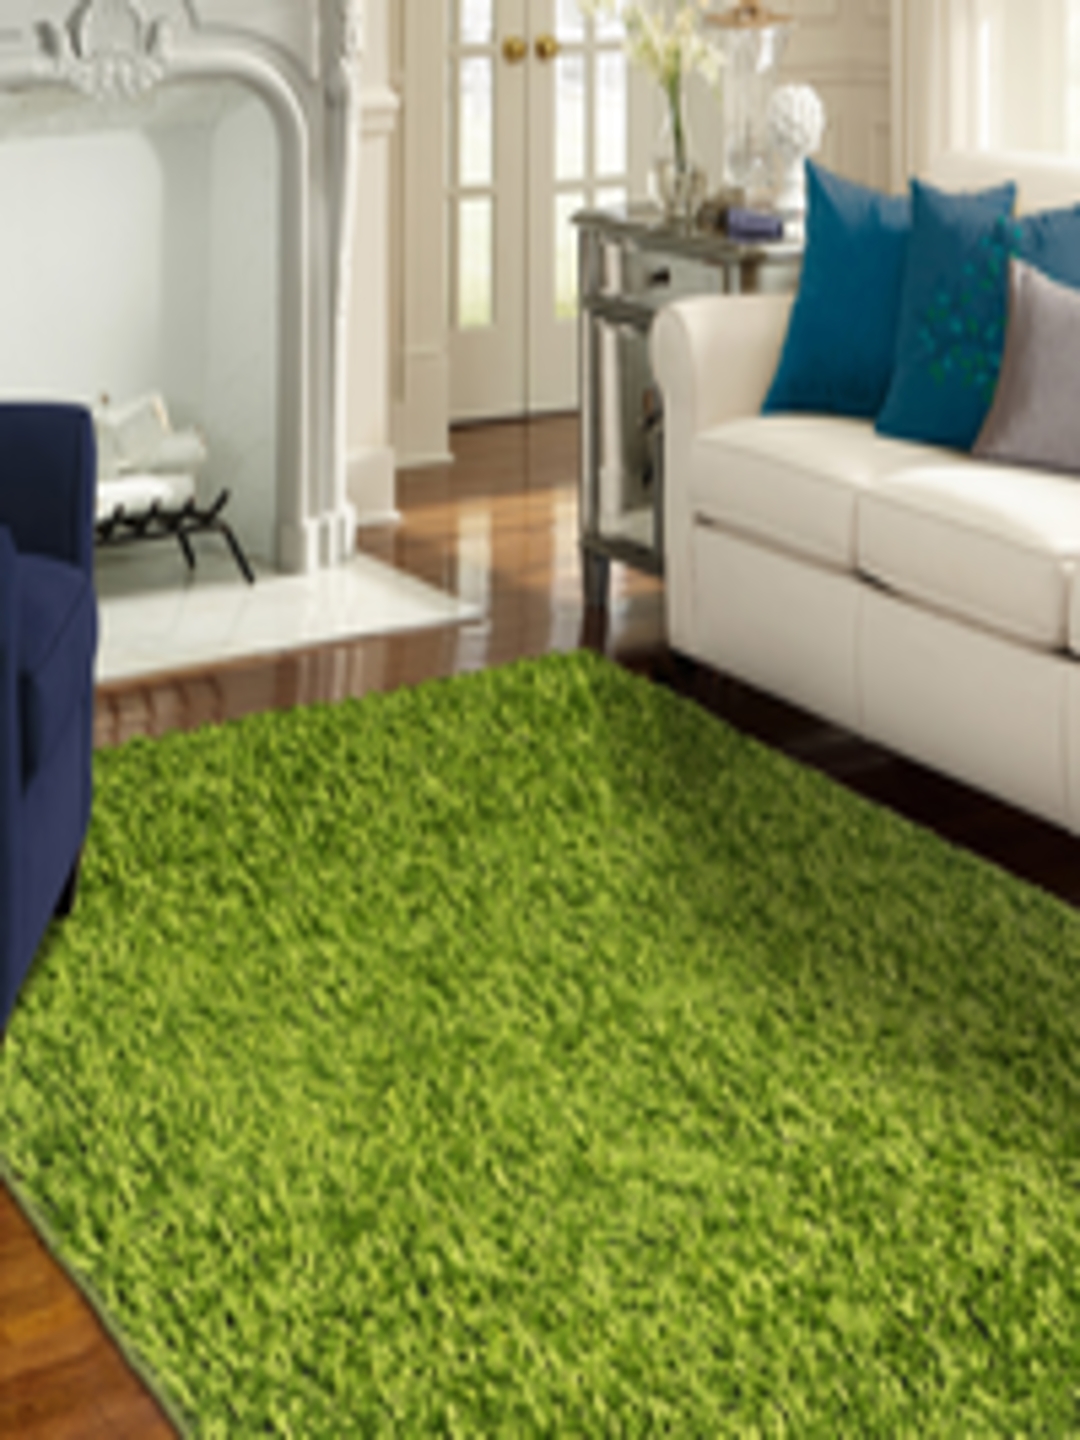 Buy Storyhome Green Carpet Carpets for Unisex 2488956 Myntra